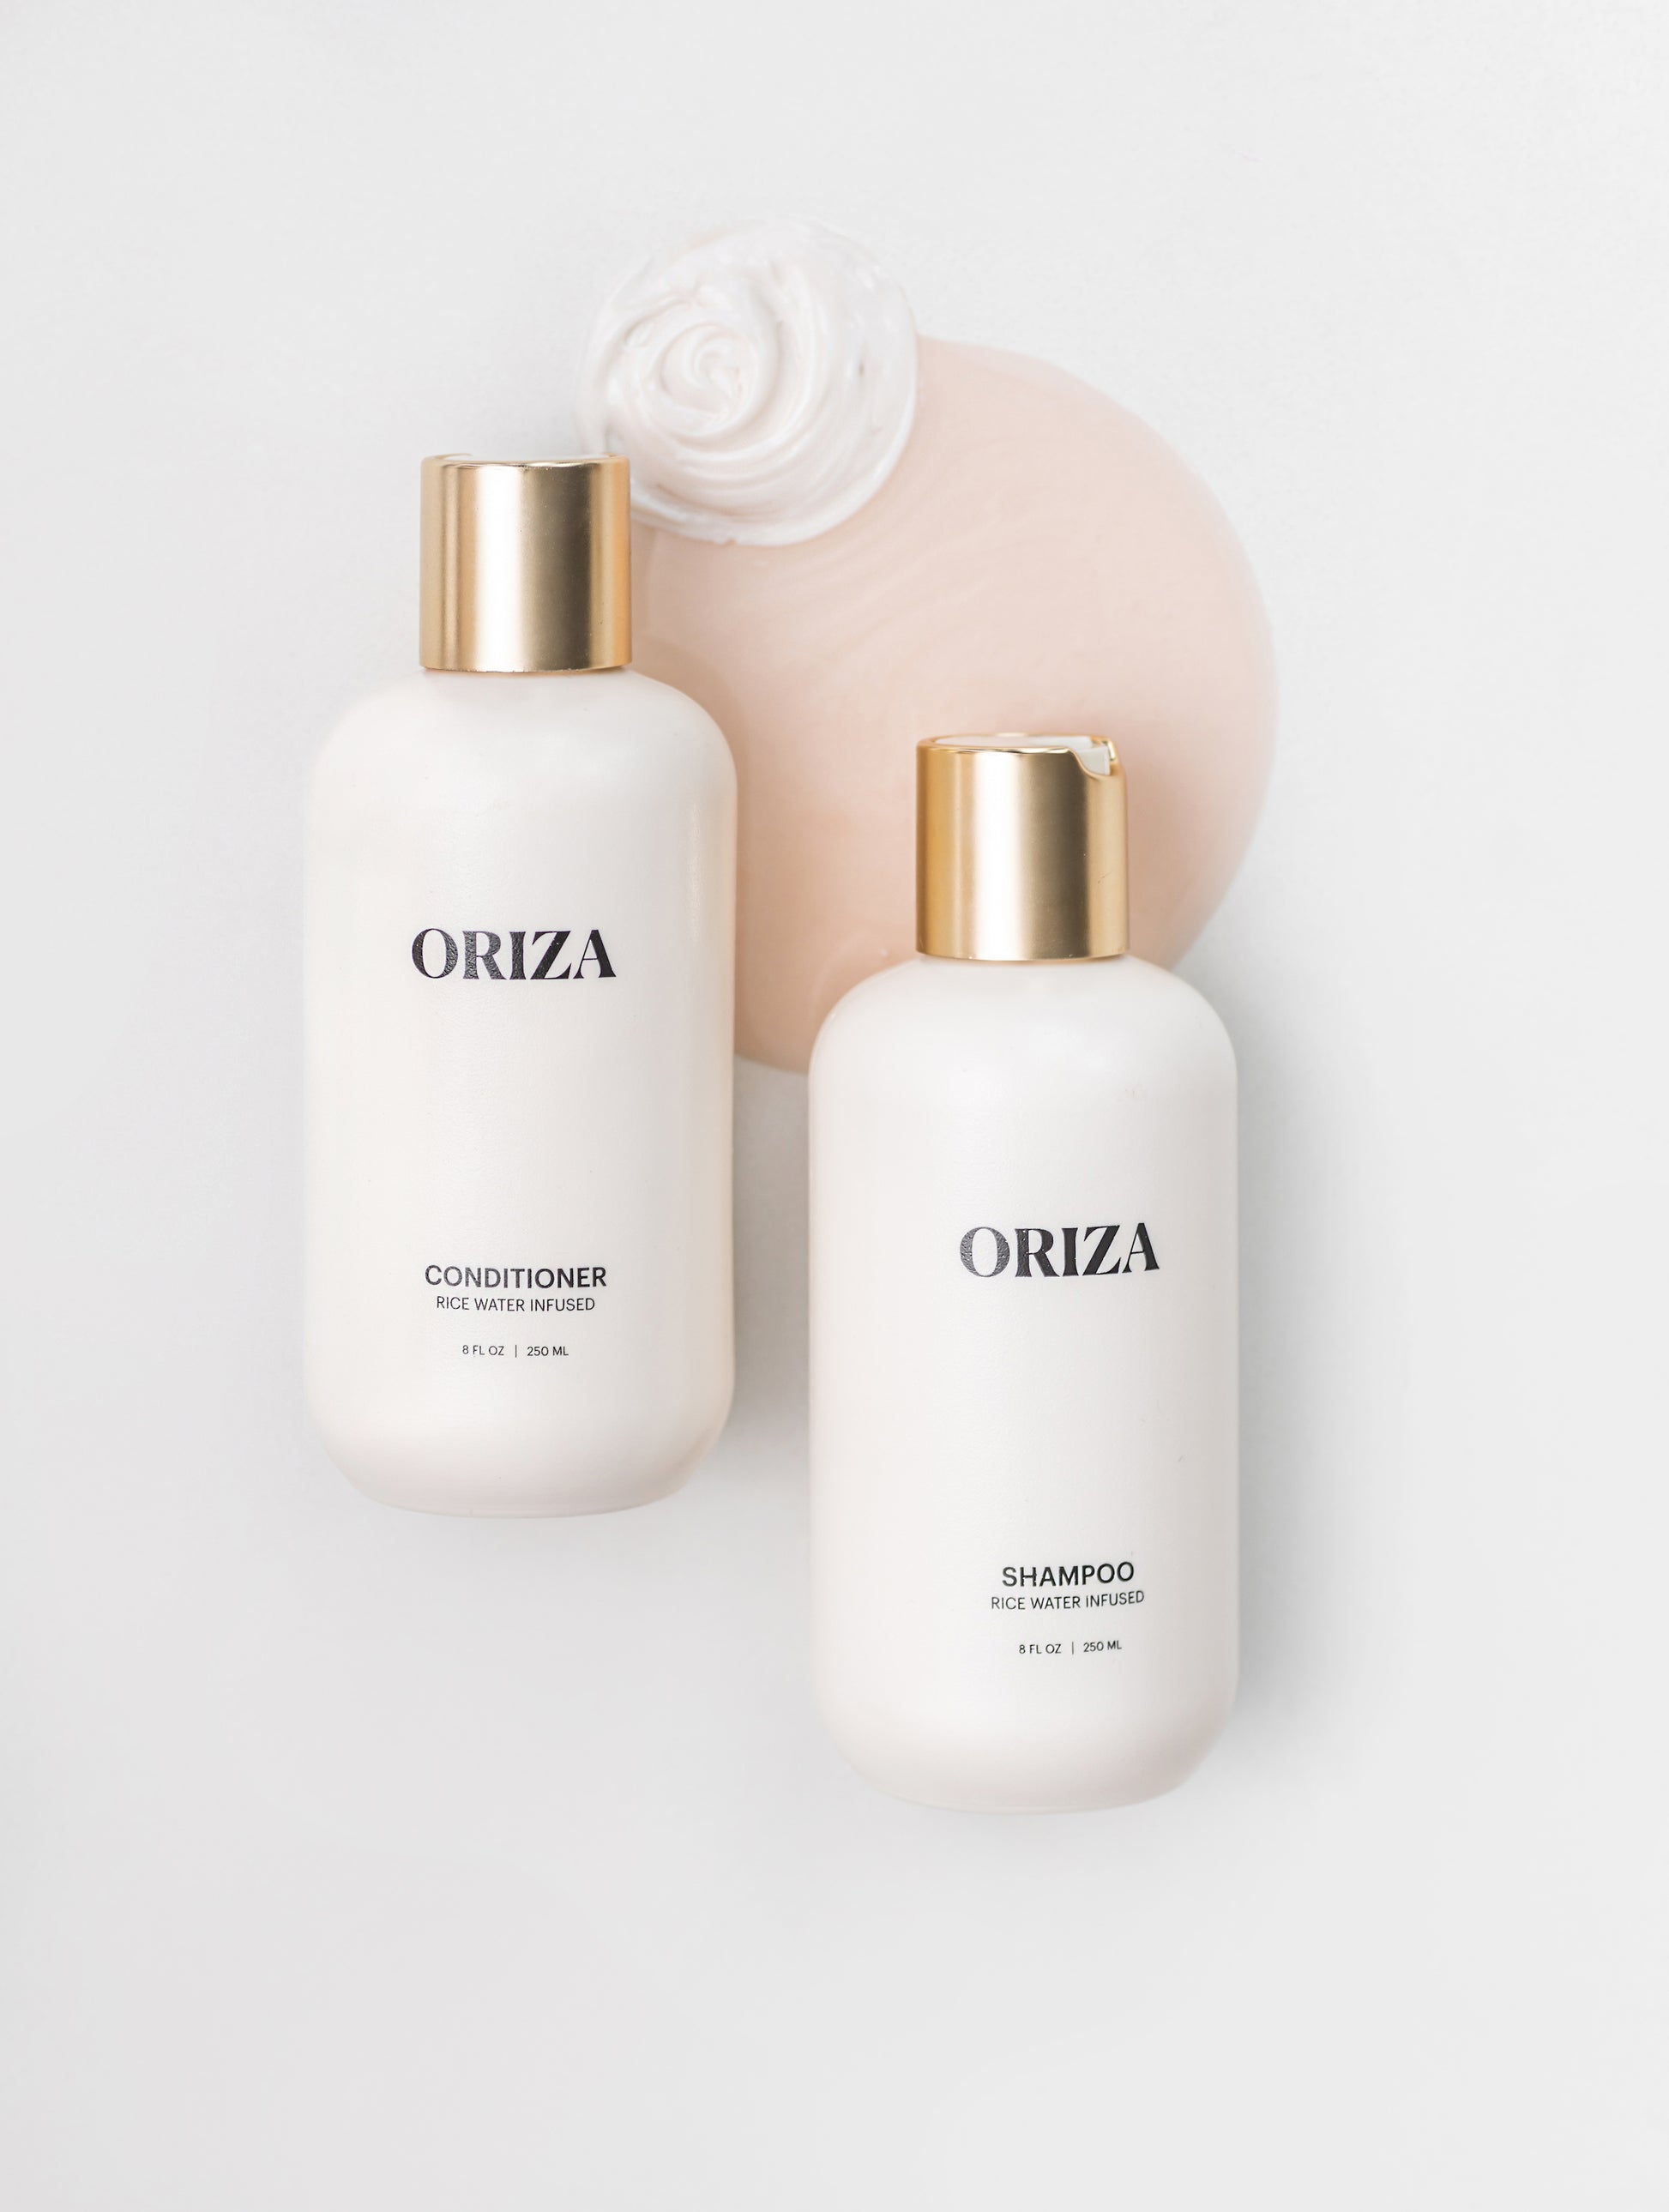 Oriza Rice Water Infused Shampoo and Conditioner